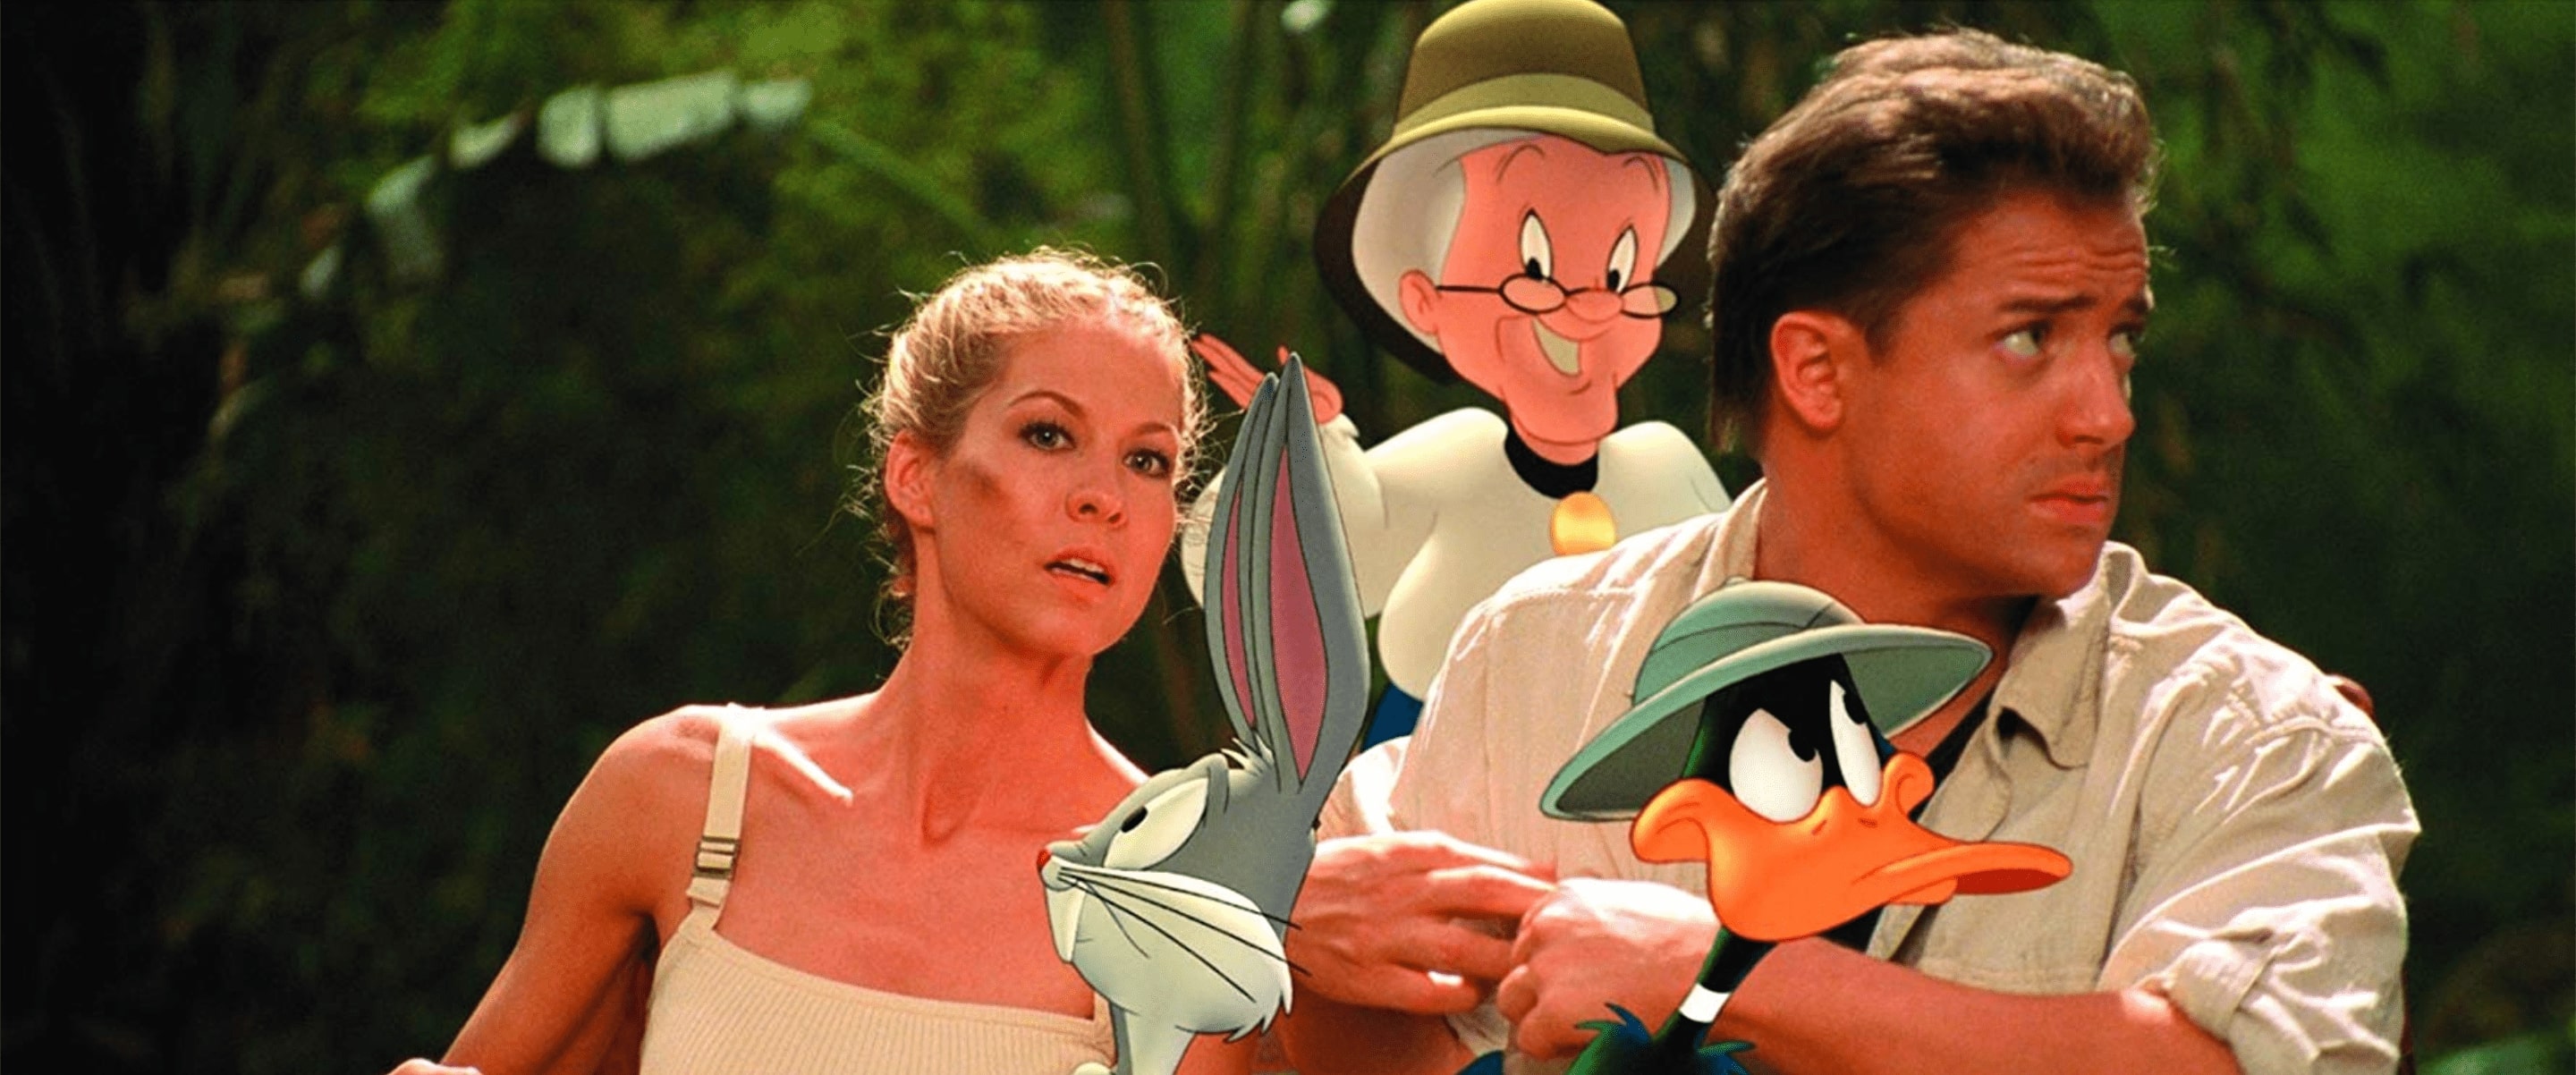 Looney Tunes3aback In Action Full Movie Download In 480p Tv